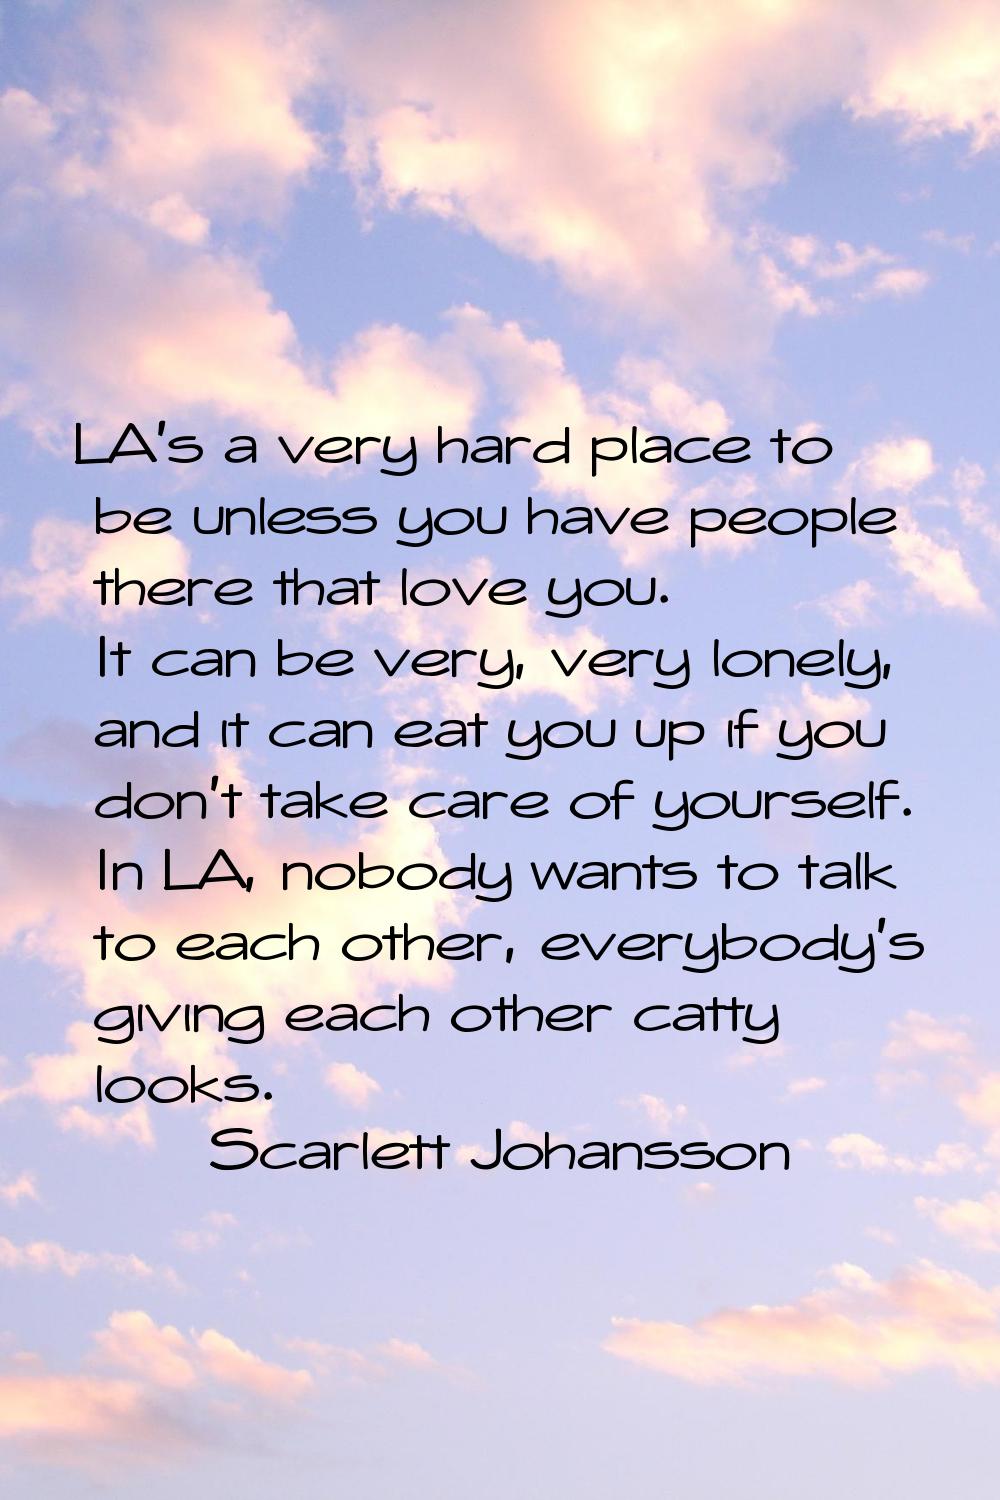 LA's a very hard place to be unless you have people there that love you. It can be very, very lonel